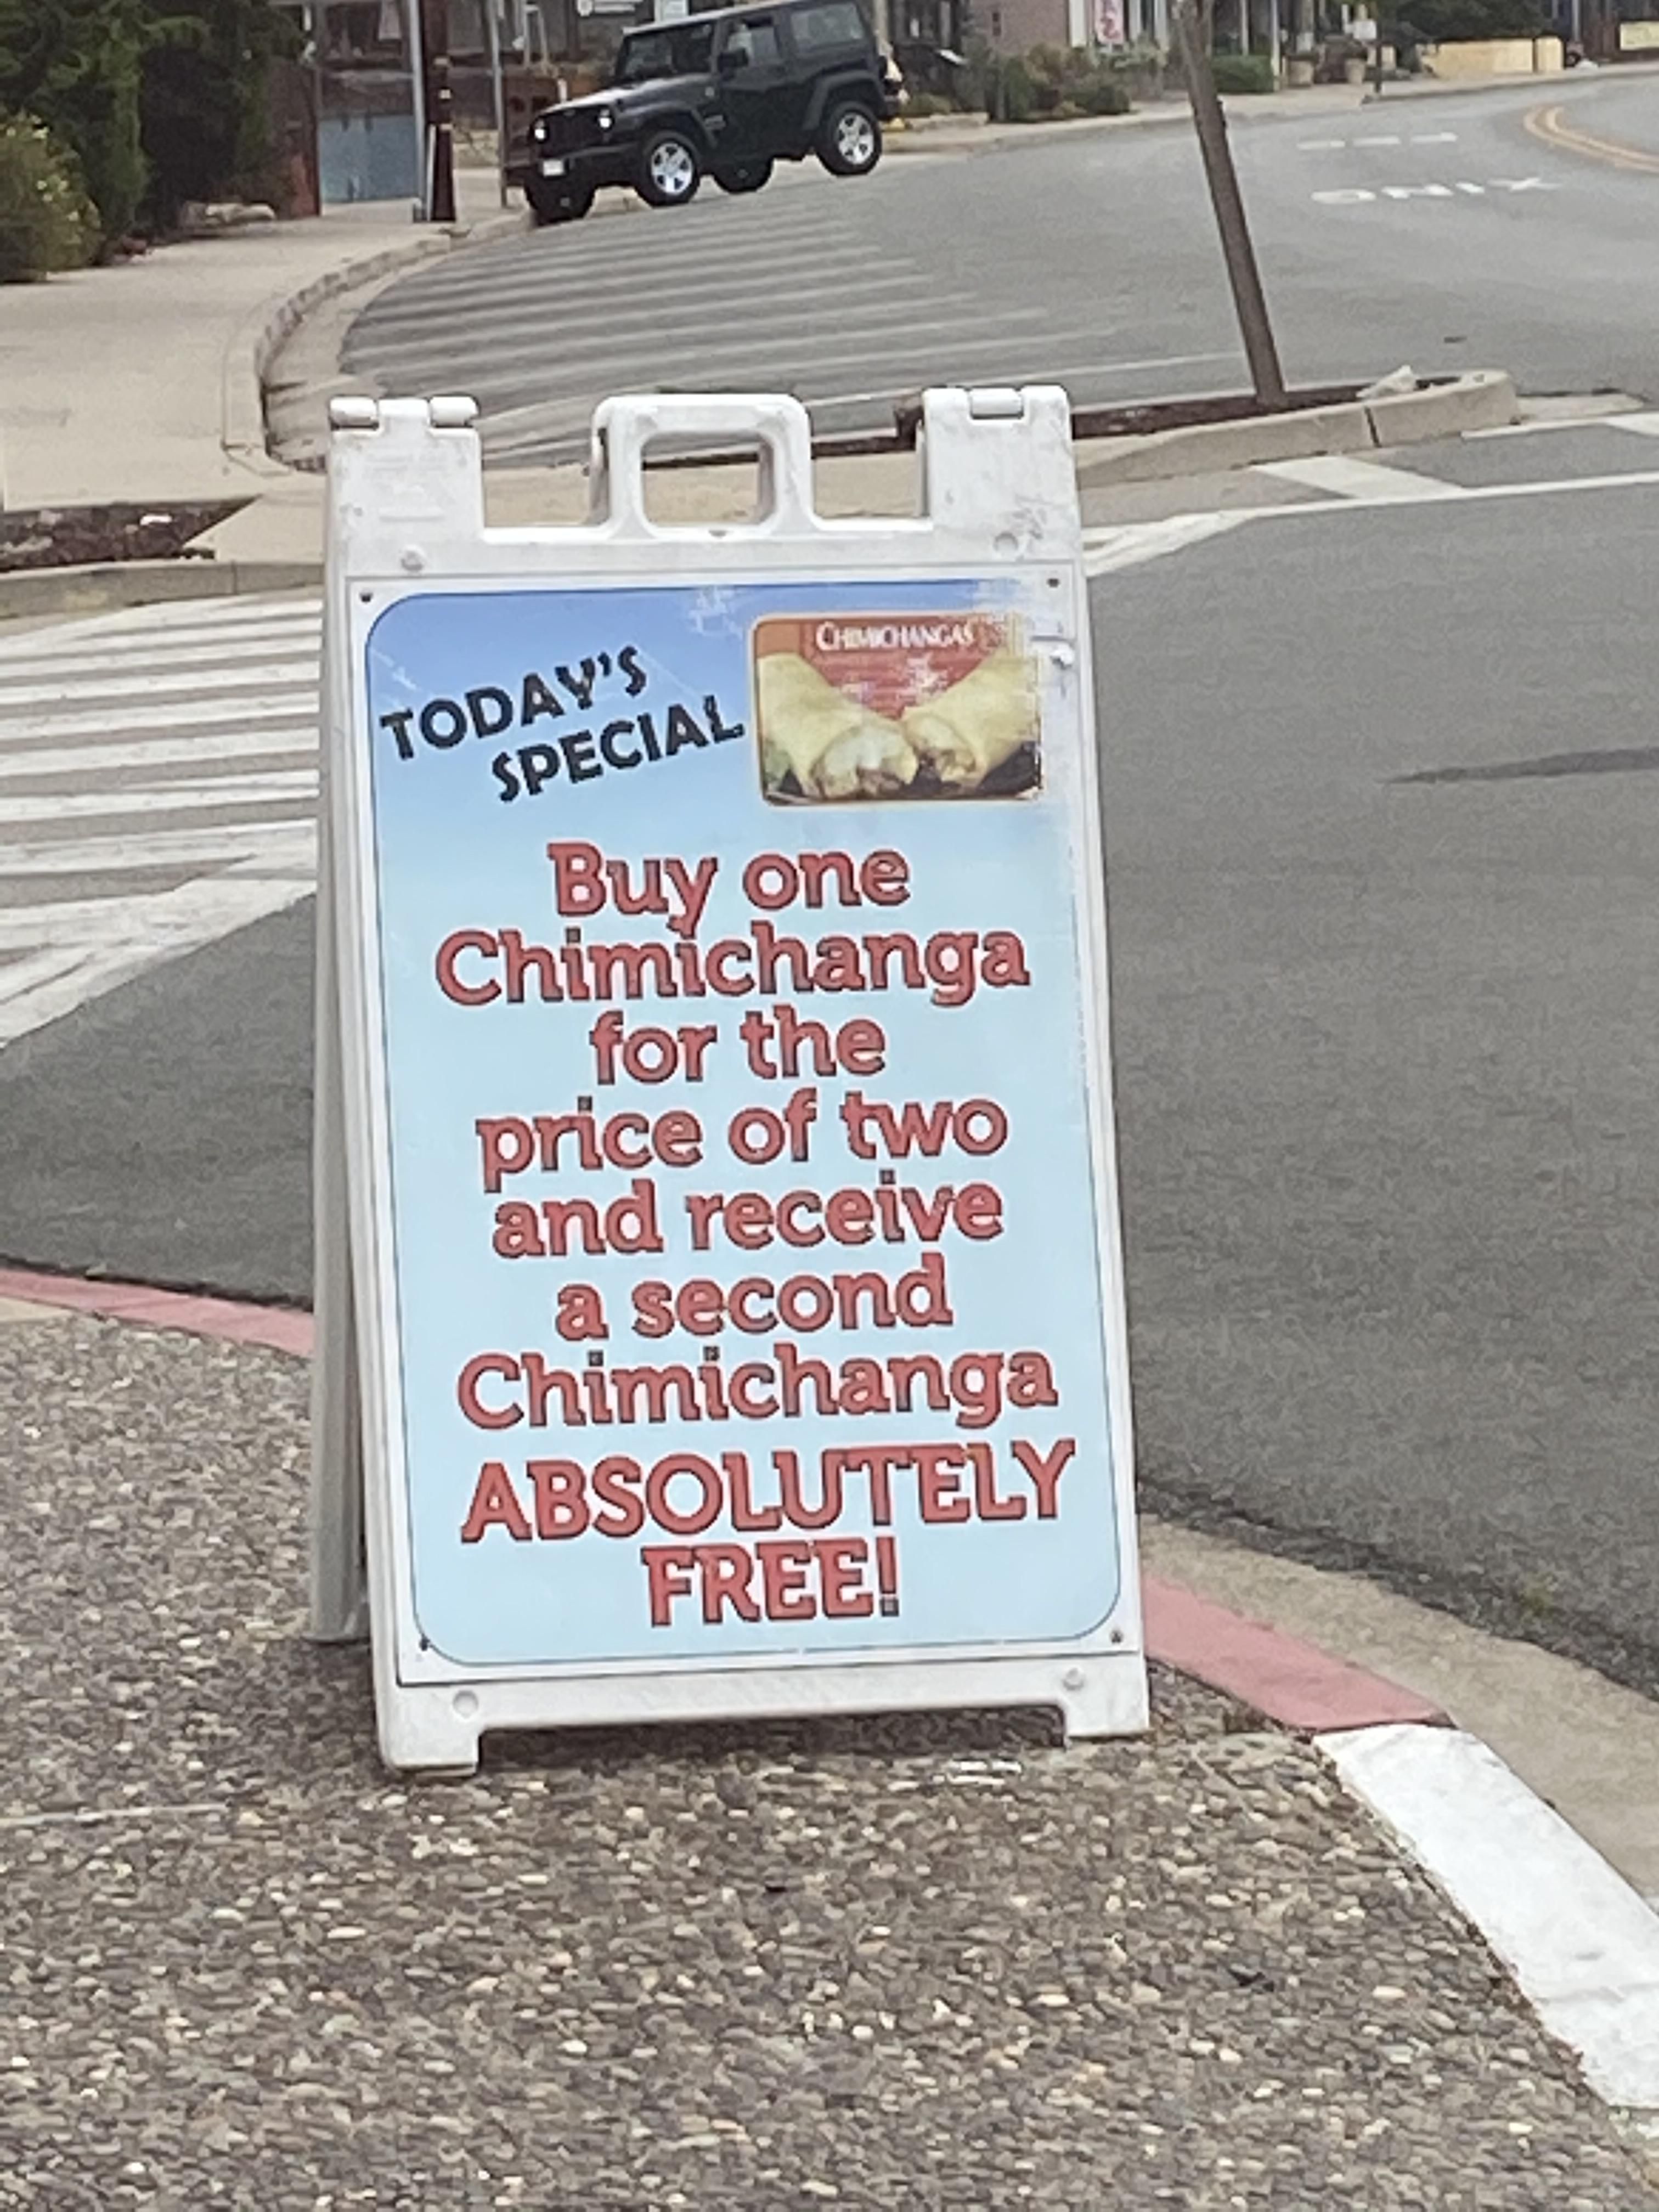 That’s a helluva deal!